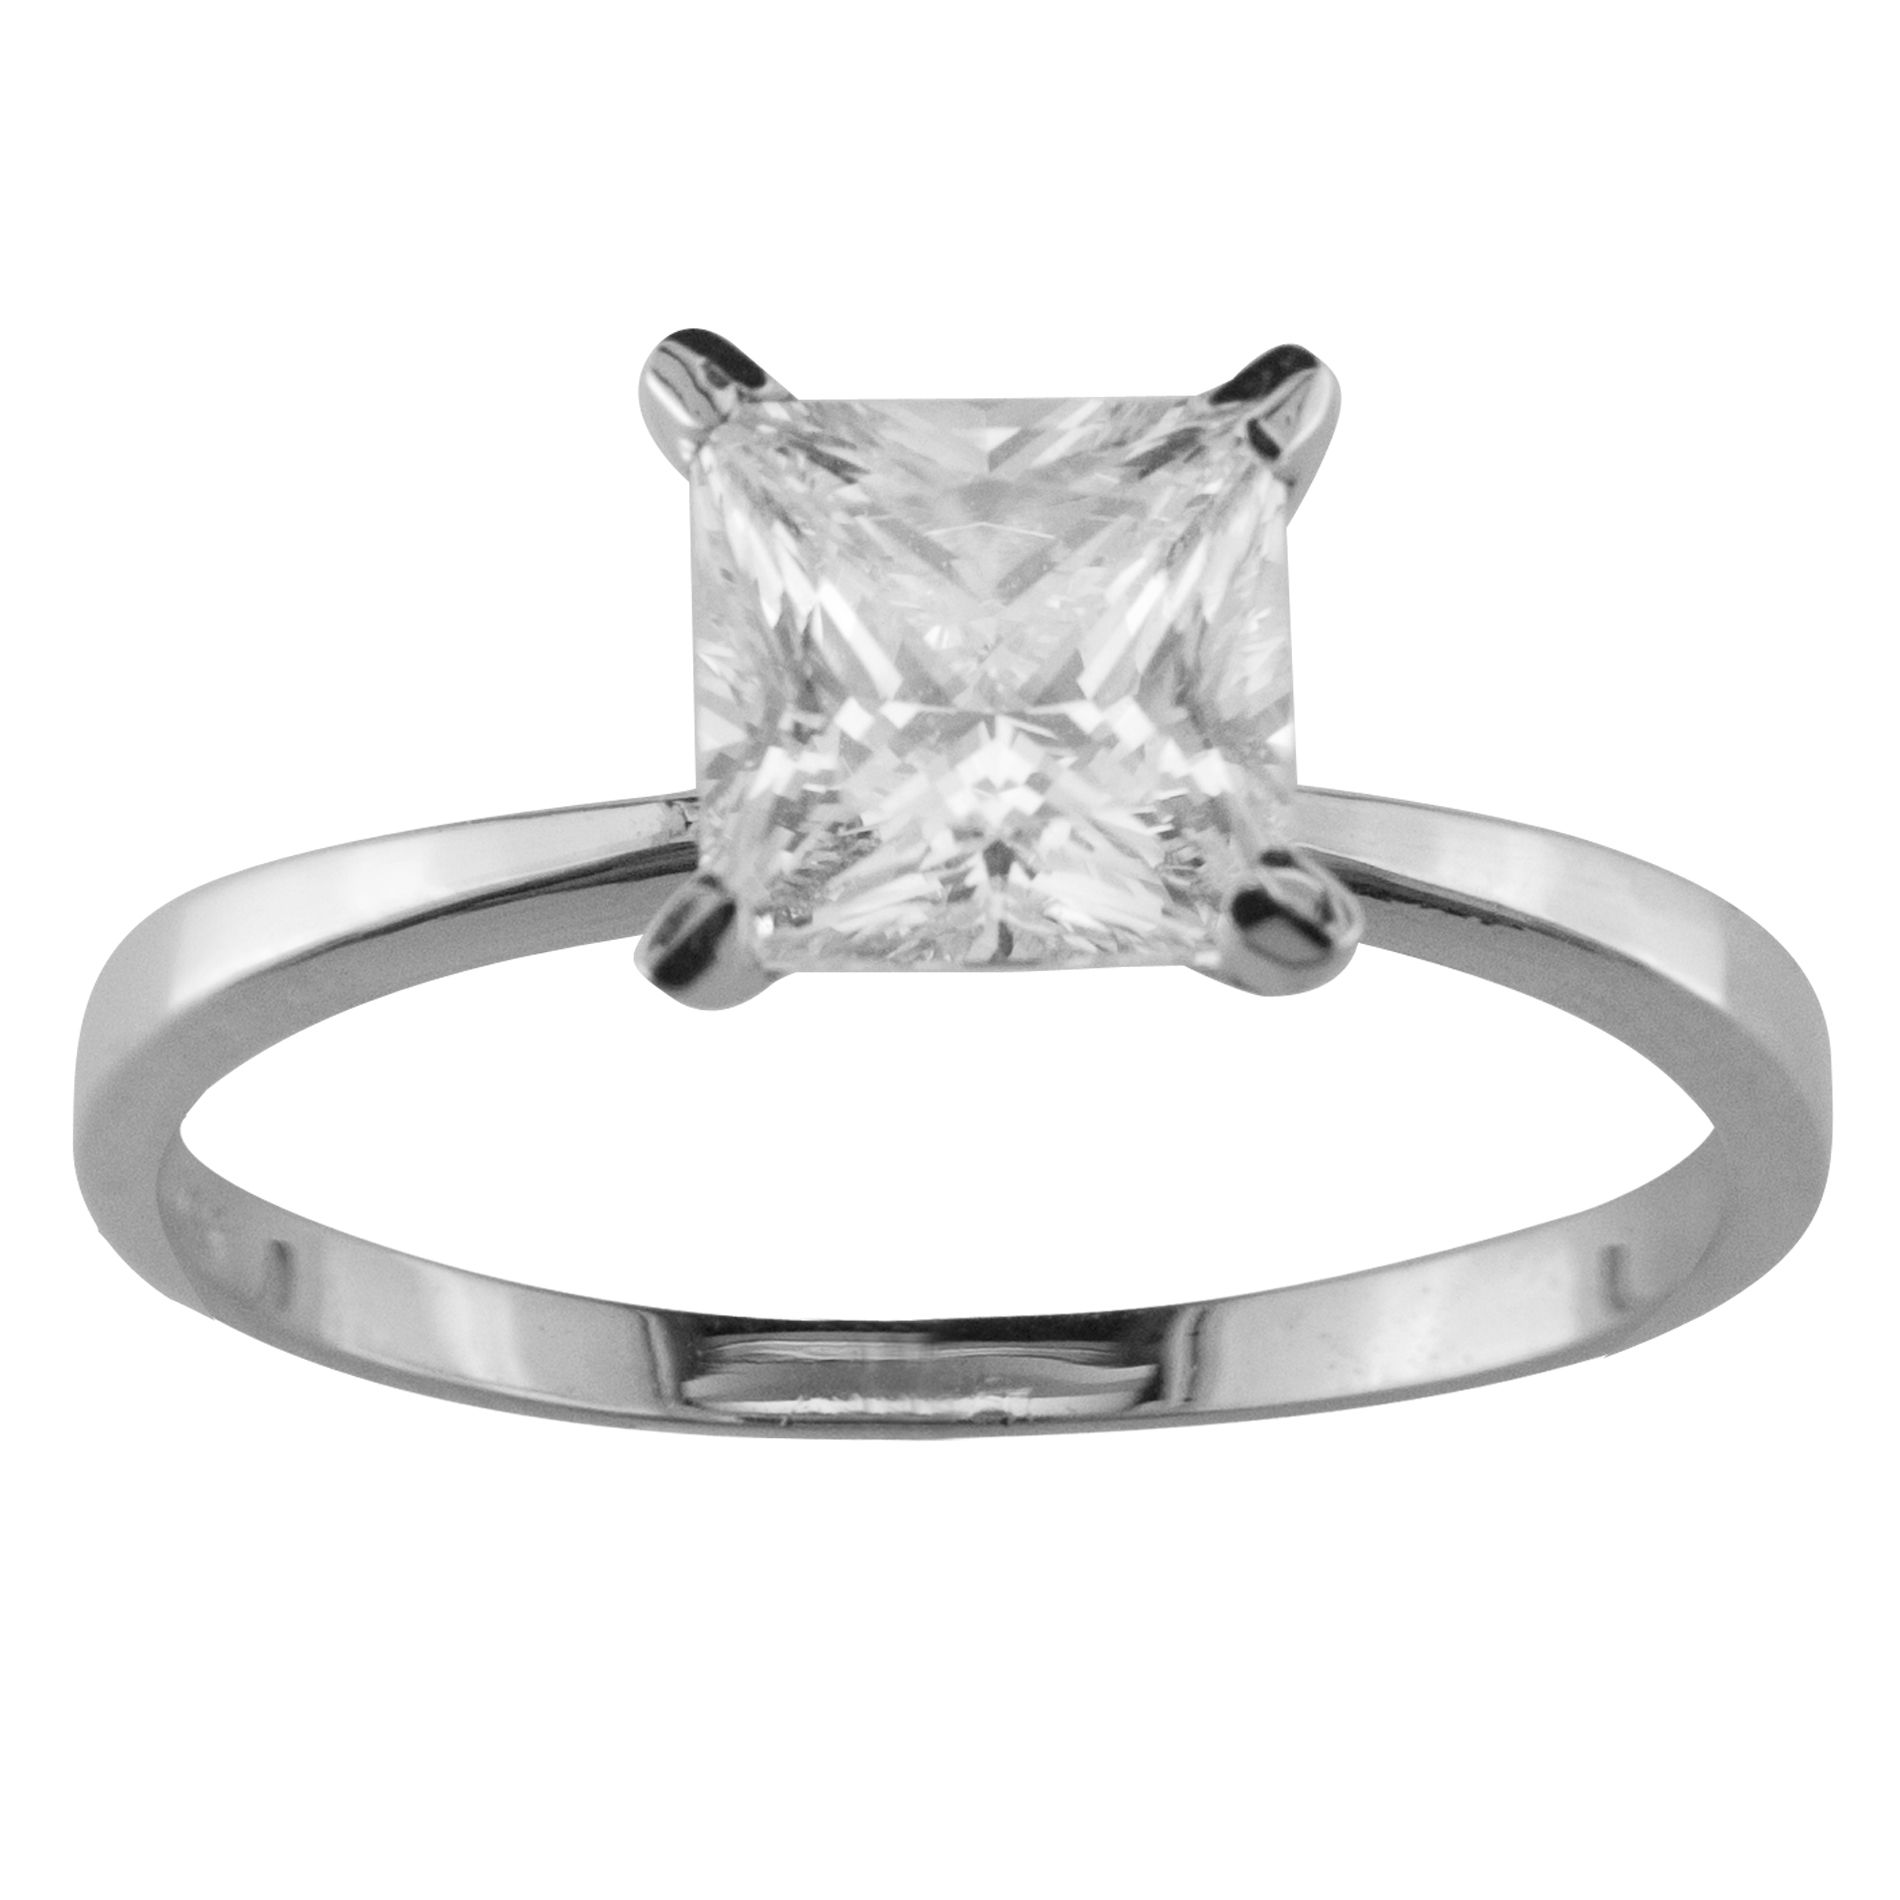 6mm Princess Cubic Zirconia Solitaire Engagement Ring in 10K White Gold